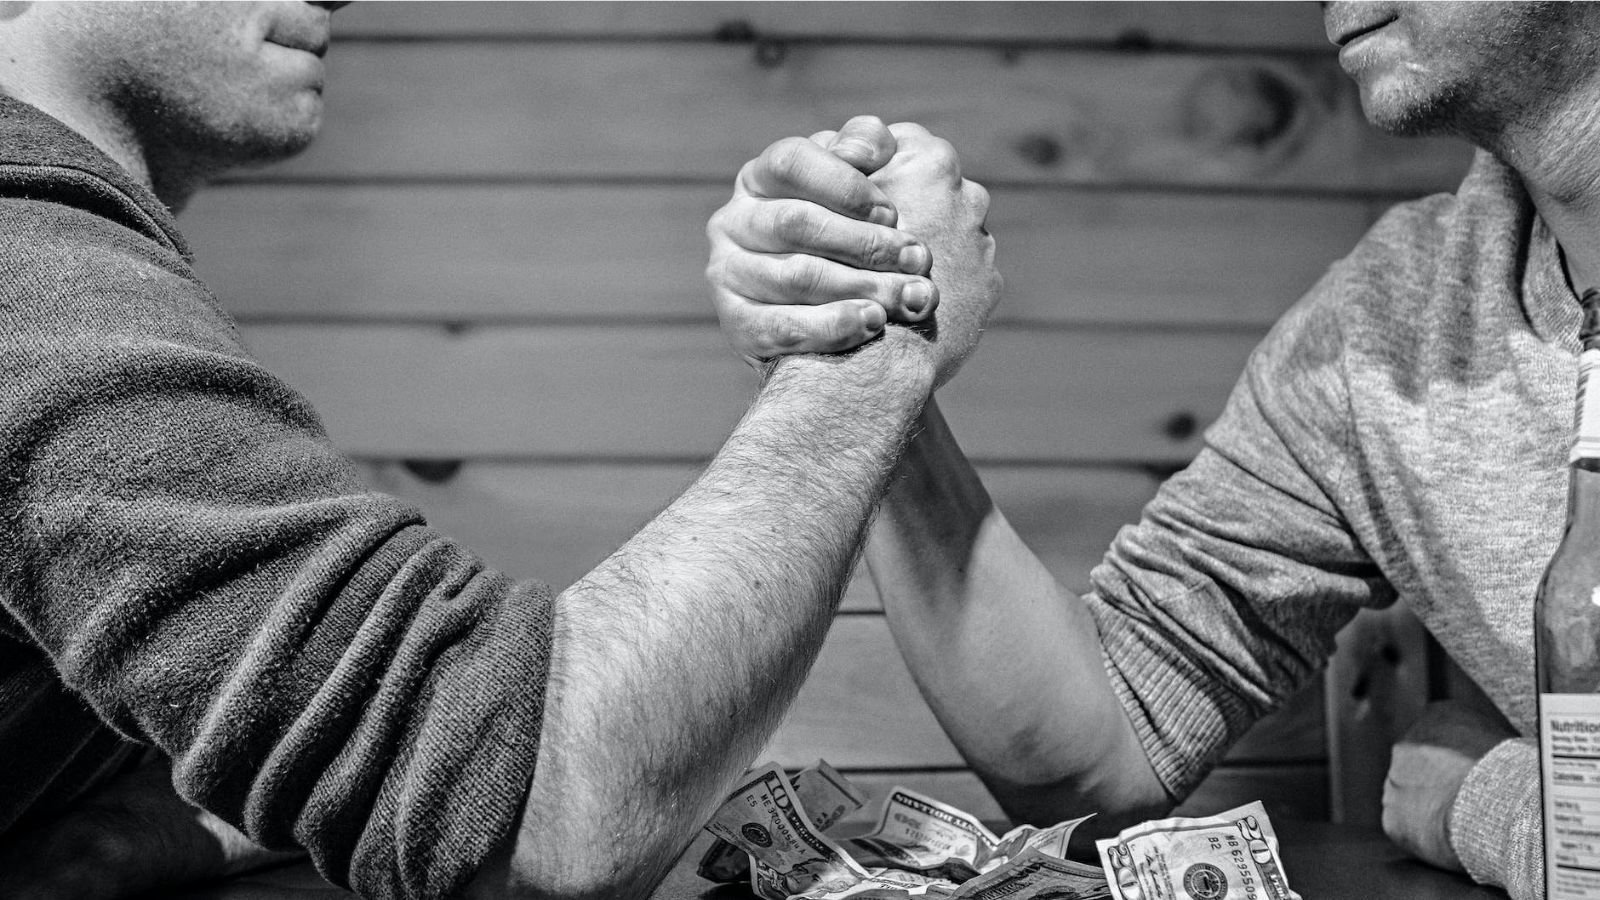 What if WordPress and Builder.io decided to Arm Wrestle?